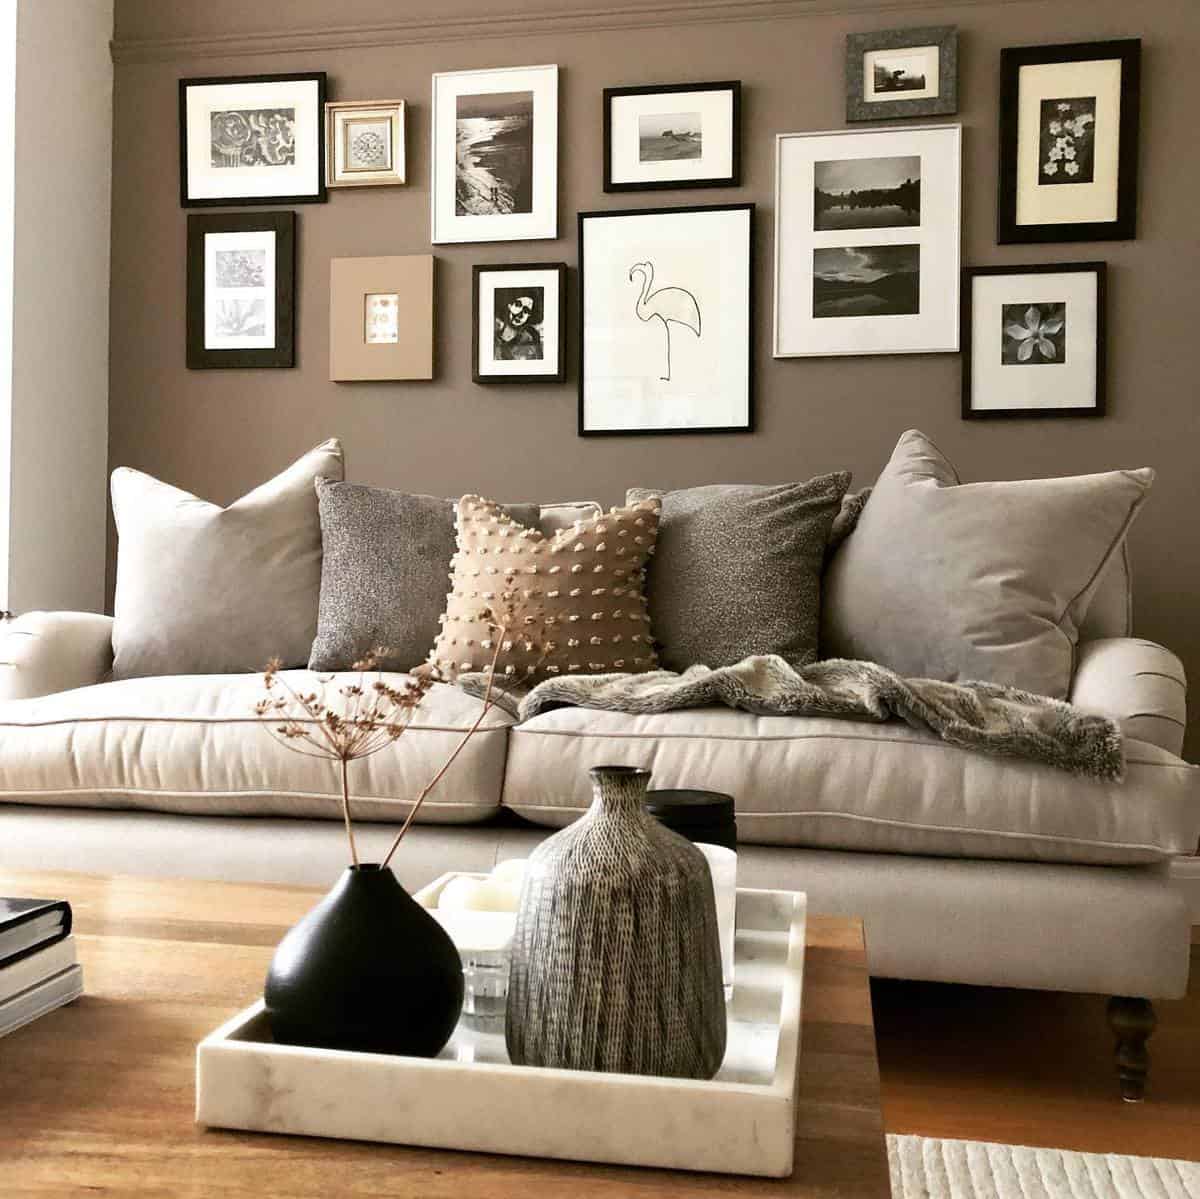 Brown accent wall, framed photos, gray couch